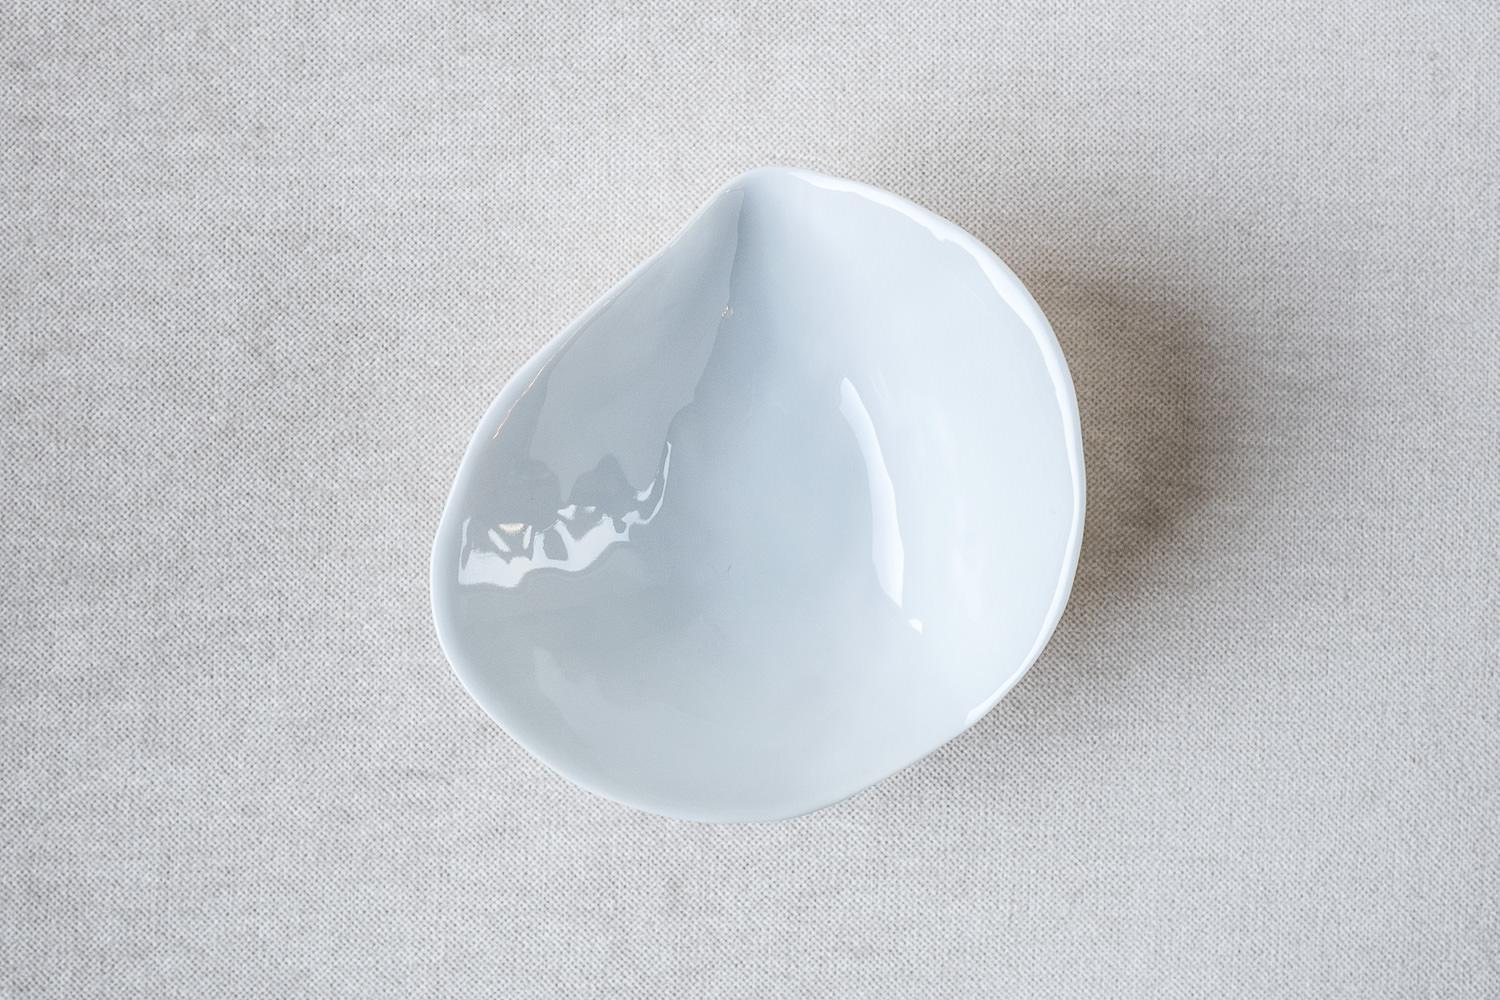 Contemporary Set of 4 x Indulge Nº2 / White / Side Dish, Handmade Porcelain Tableware For Sale